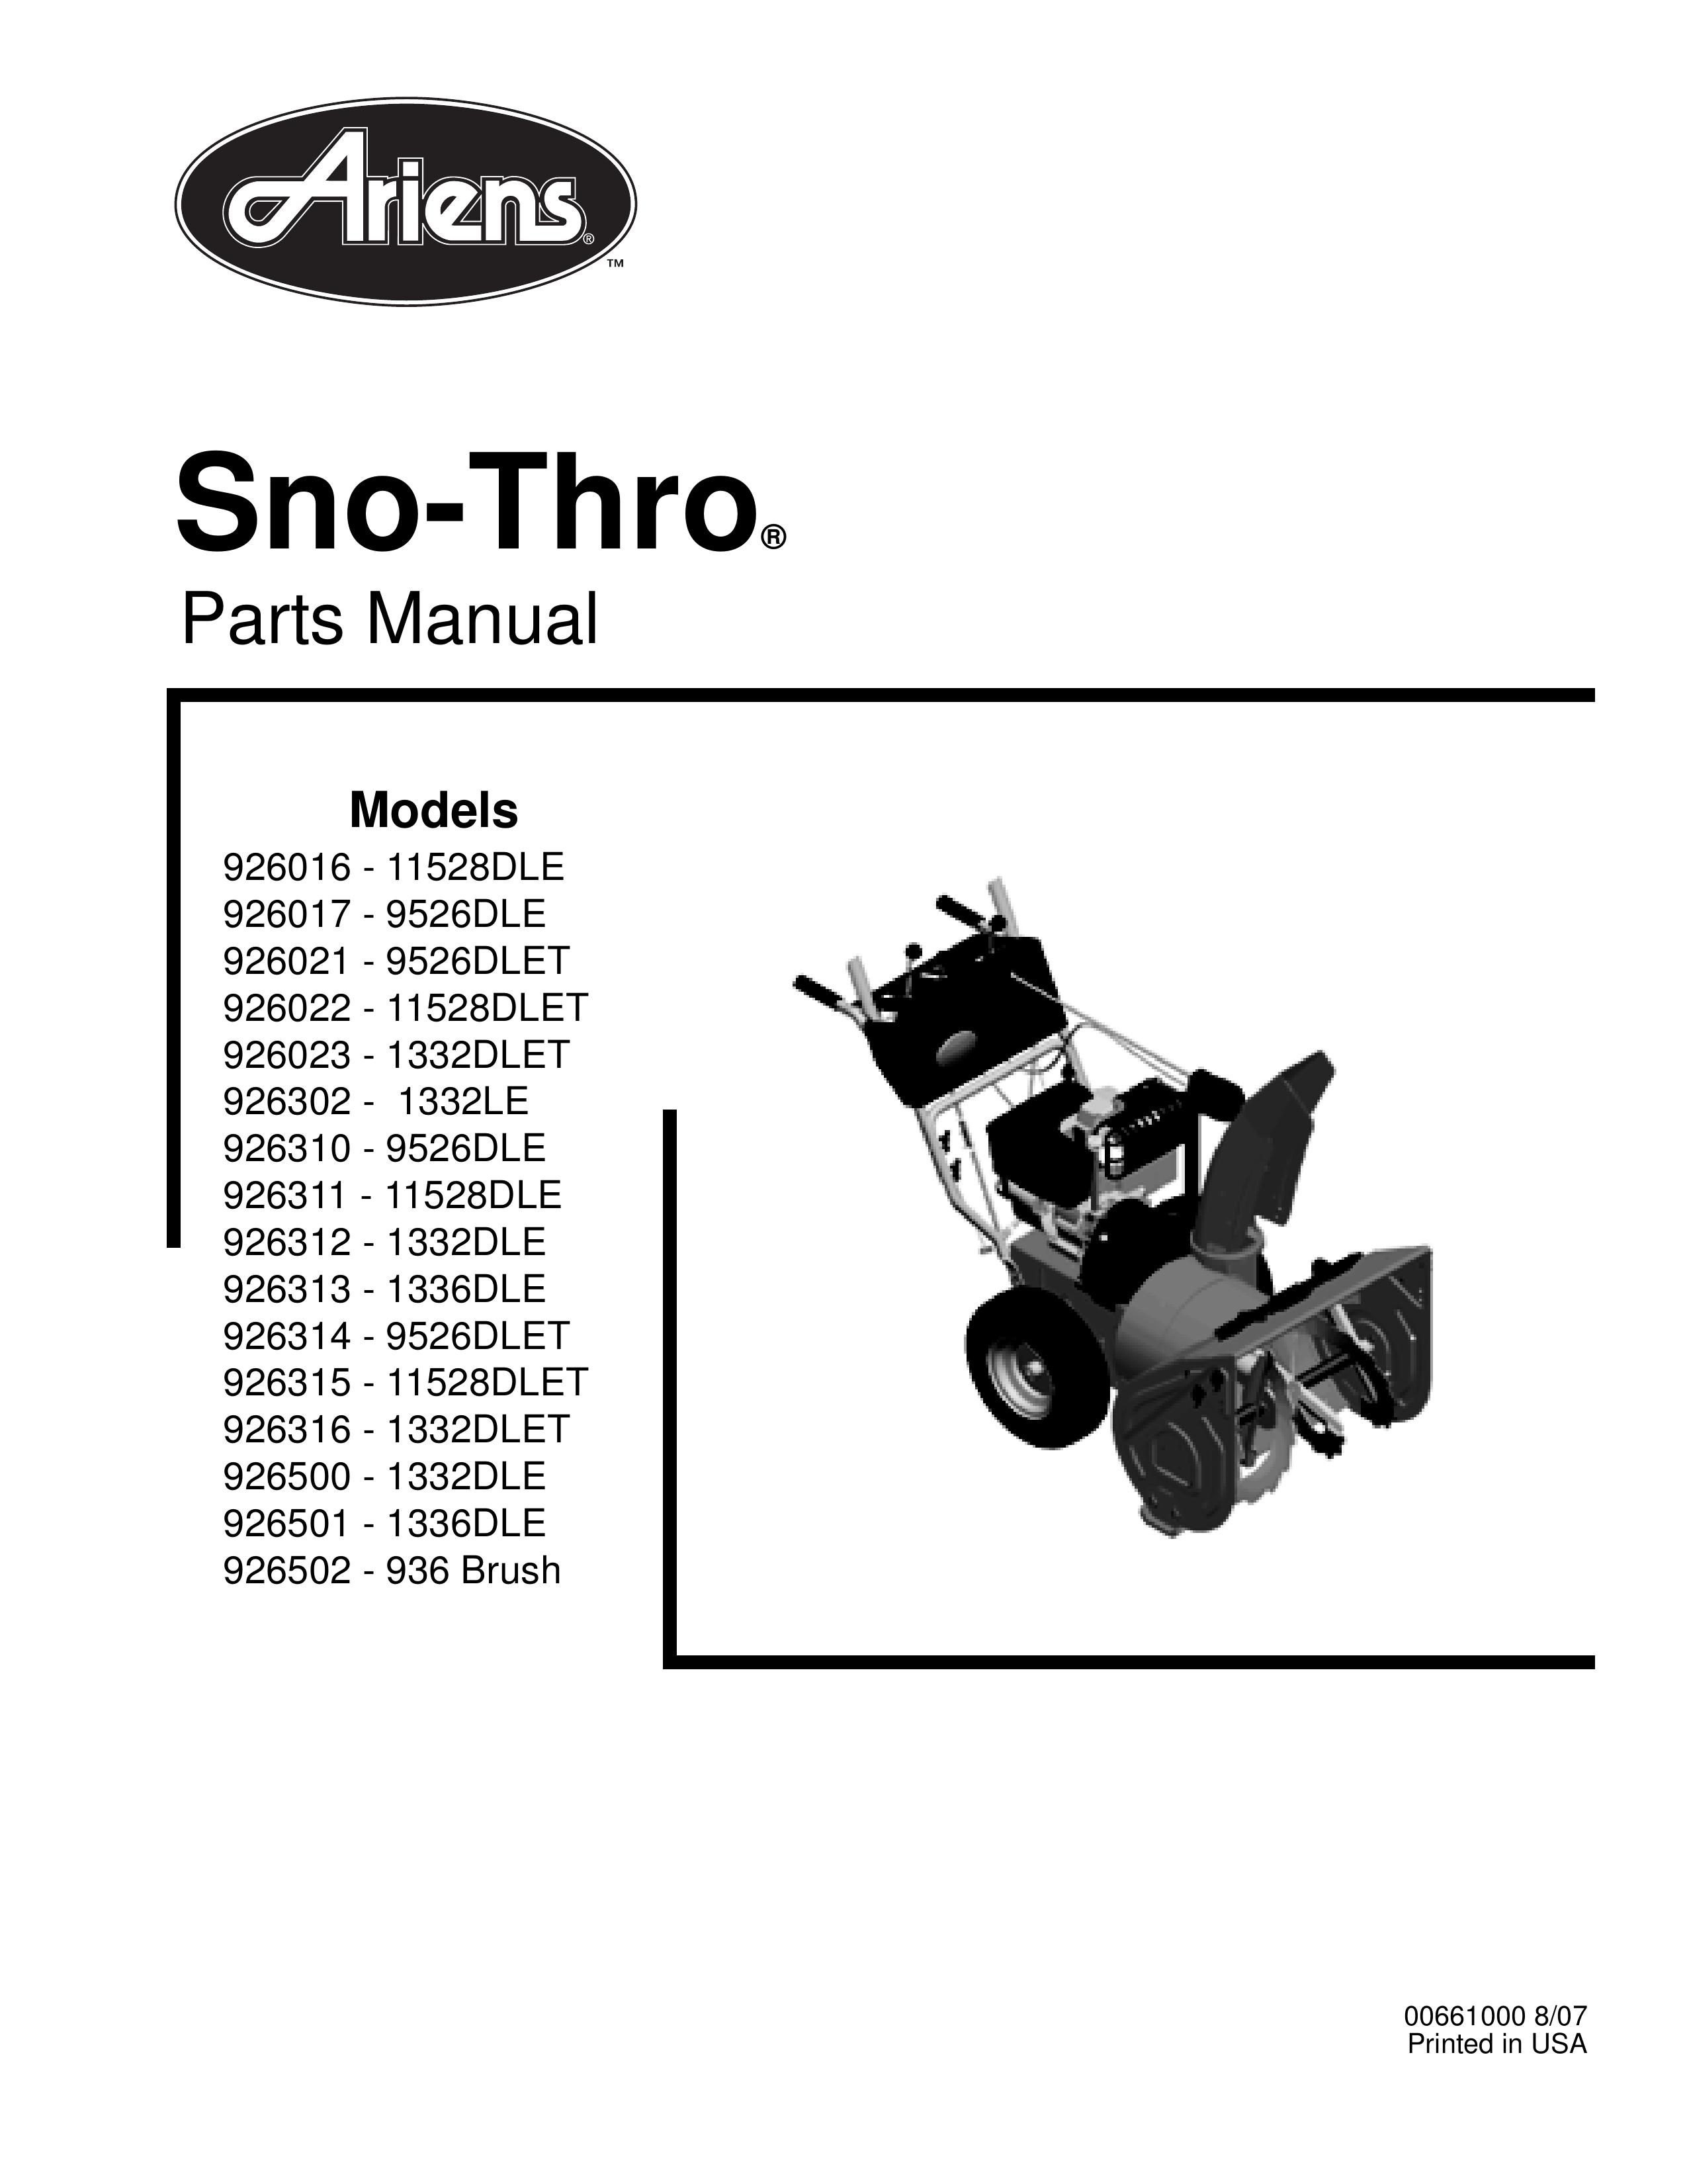 Ariens 926310 - 9526DLE Snow Blower Attachment User Manual